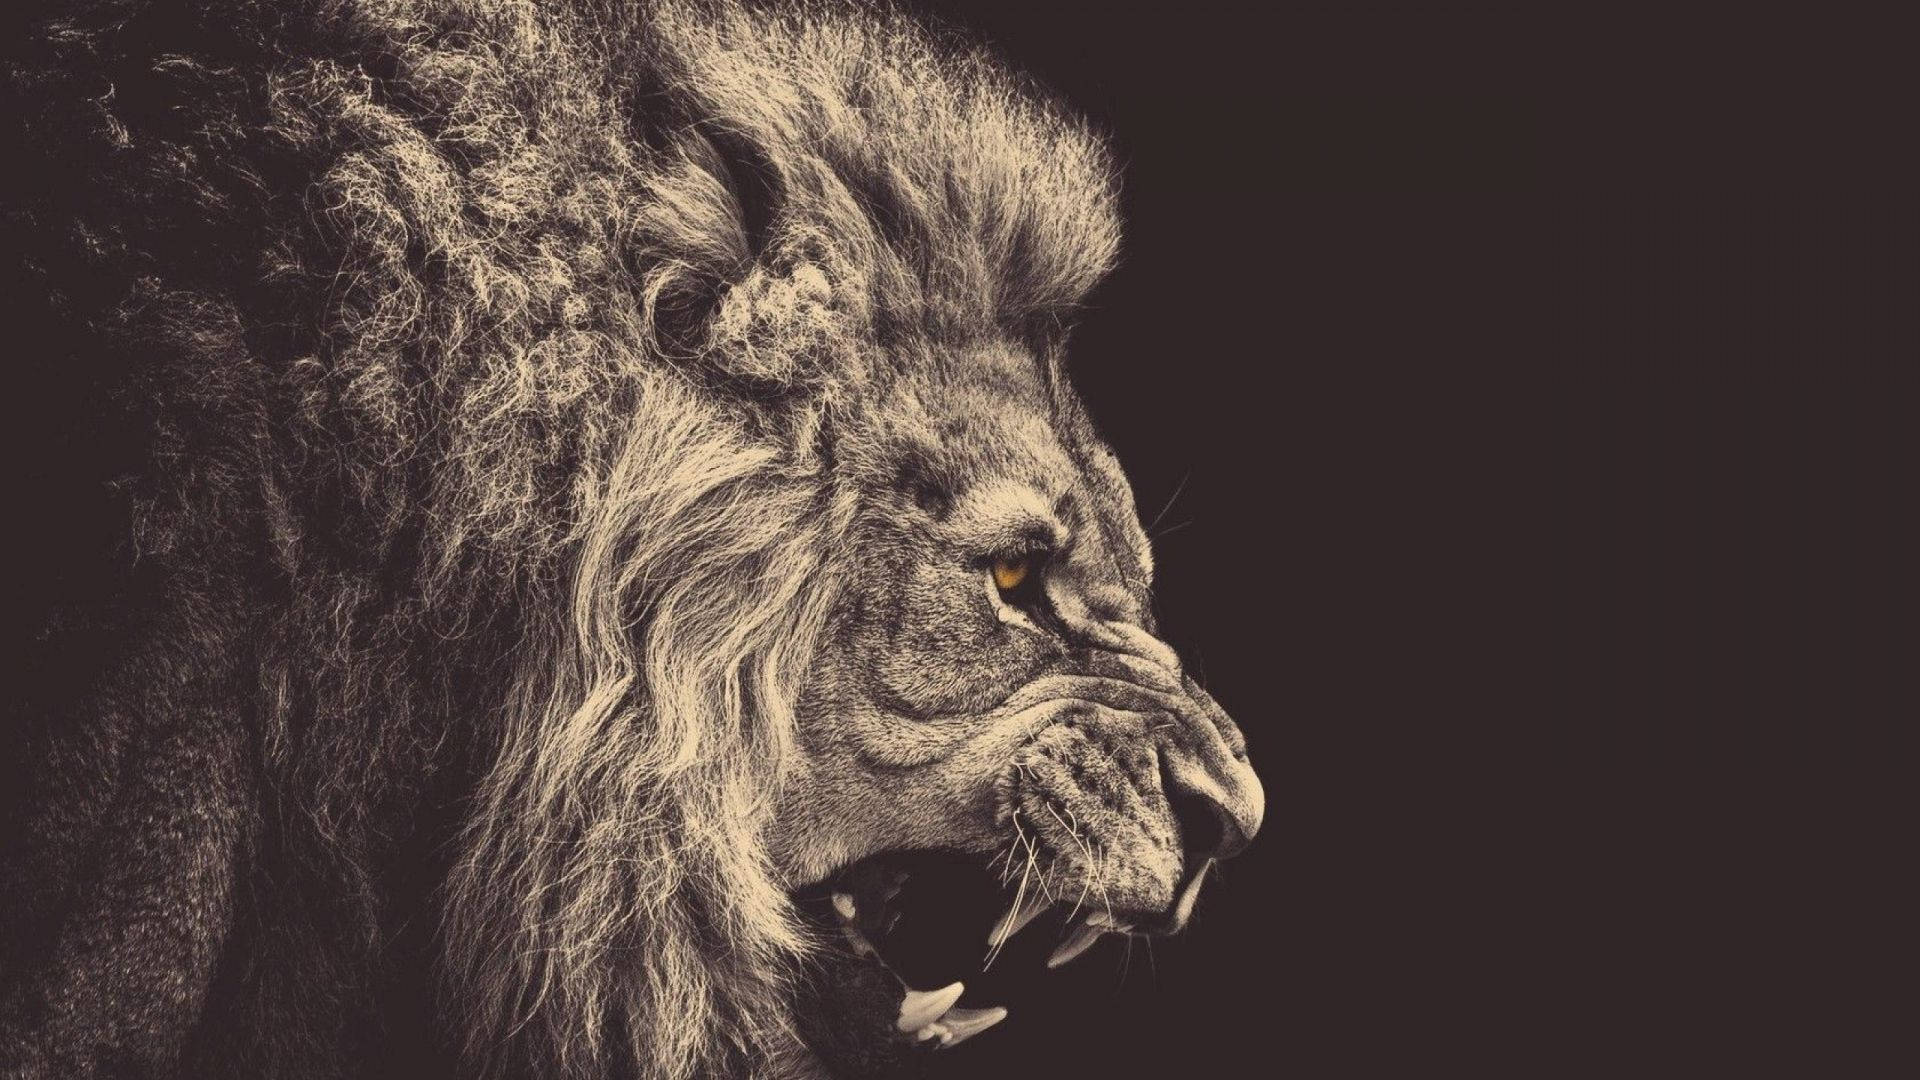 1080p Hd Black And White Lion Background